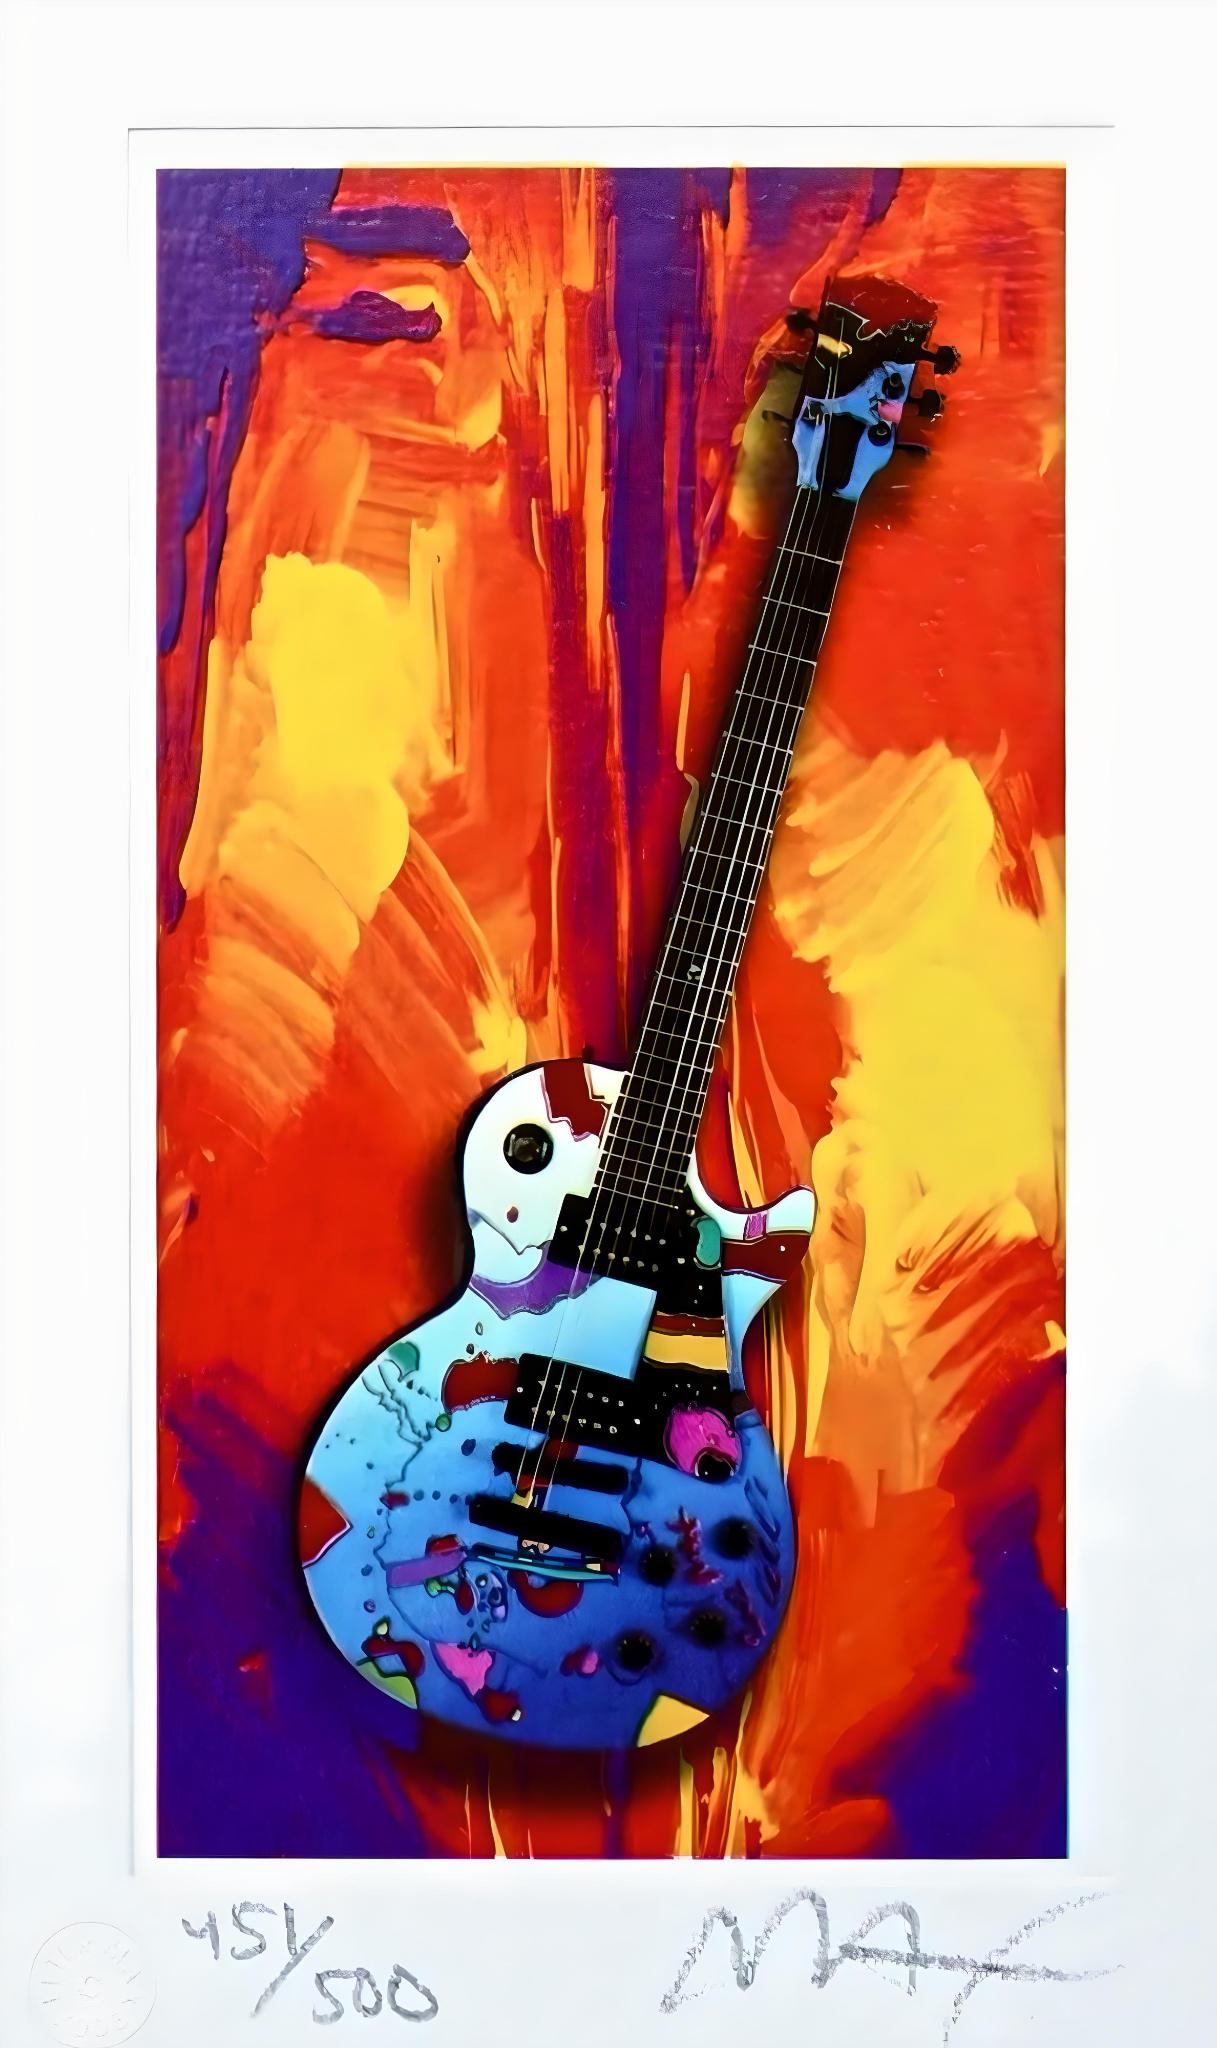 Artist: Peter Max (1937)
Title: Rock N' Roll Guitar III
Year: 2003
Edition: 451/500, plus proofs
Medium: Lithograph on Lustro Saxony paper
Size: 4.12 x 2.43 inches
Condition: Excellent
Inscription: Signed and numbered by the artist.
Notes: Published